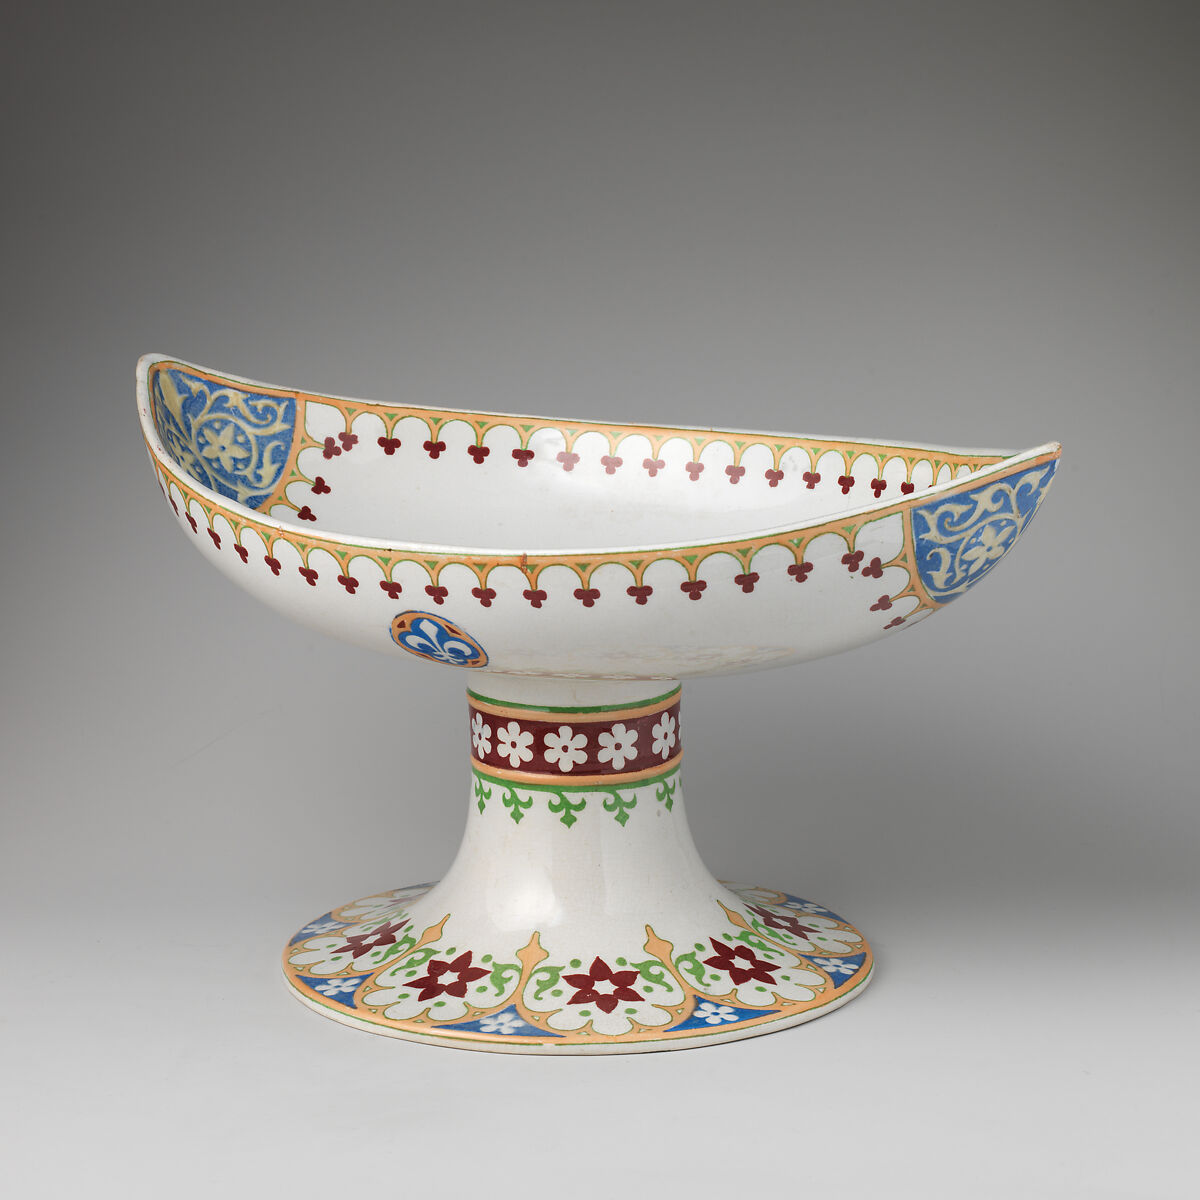 Tazza, Augustus Welby Northmore Pugin (British, London 1812–1852 Ramsgate), Earthenware with transfer-printed decoration, British, Stoke-on-Trent, Staffordshire 